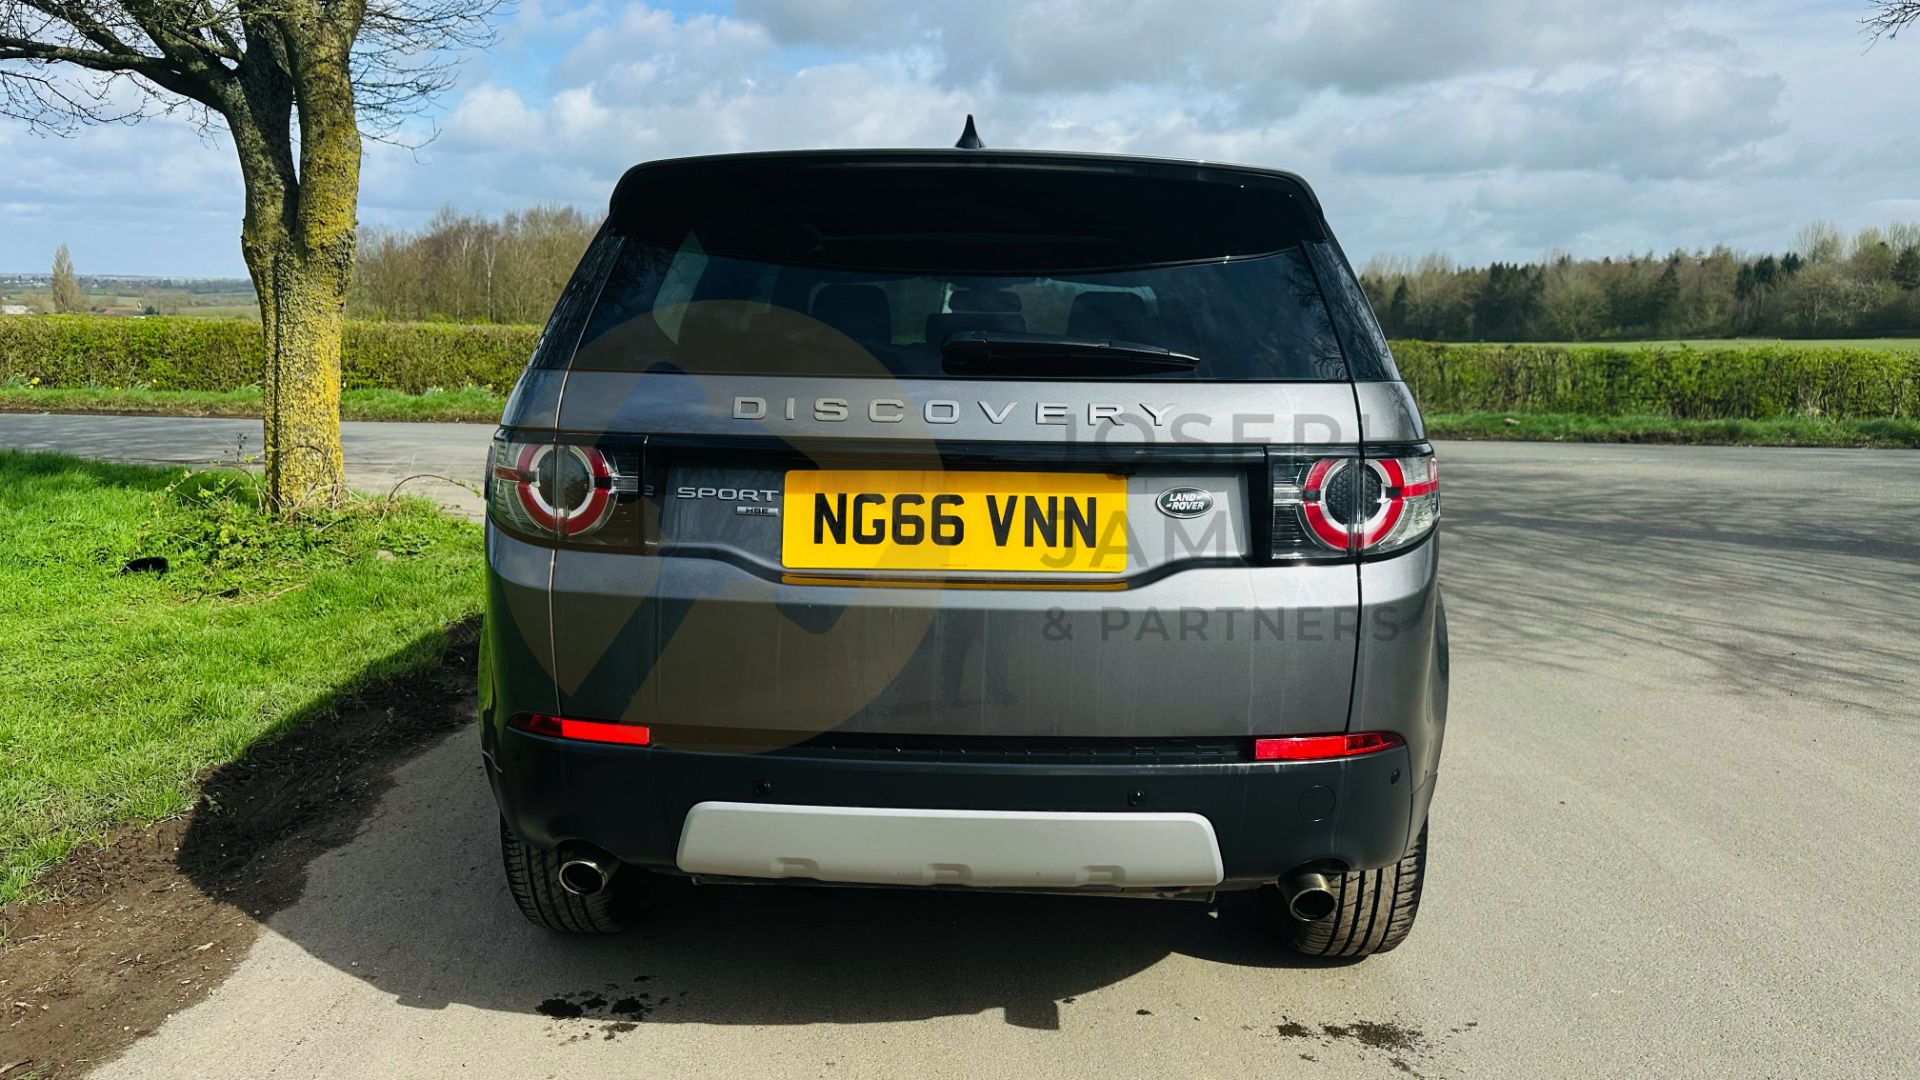 (On Sale) LAND ROVER DISCOVERY SPORT *HSE EDITION* 7 SEATER SUV (2017 - EURO 6) 2.0 TD4 - AUTOMATIC - Image 11 of 48